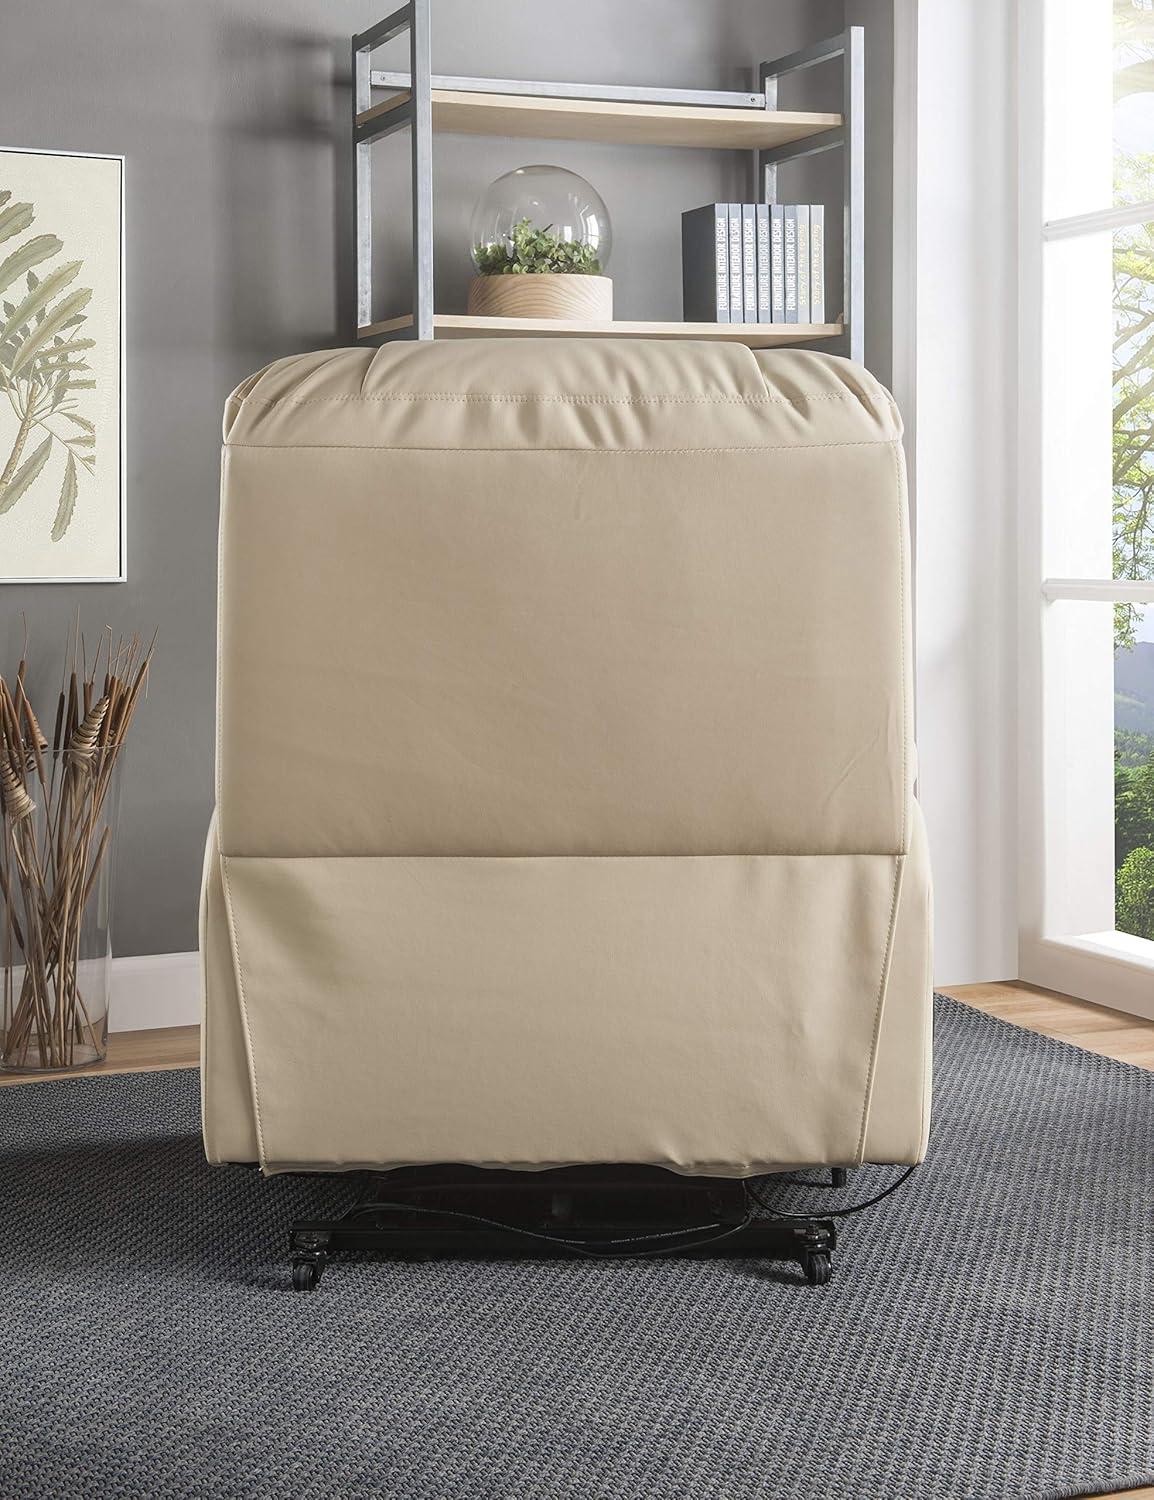 Luxurious Beige Faux Leather Massage Recliner with Power Lift